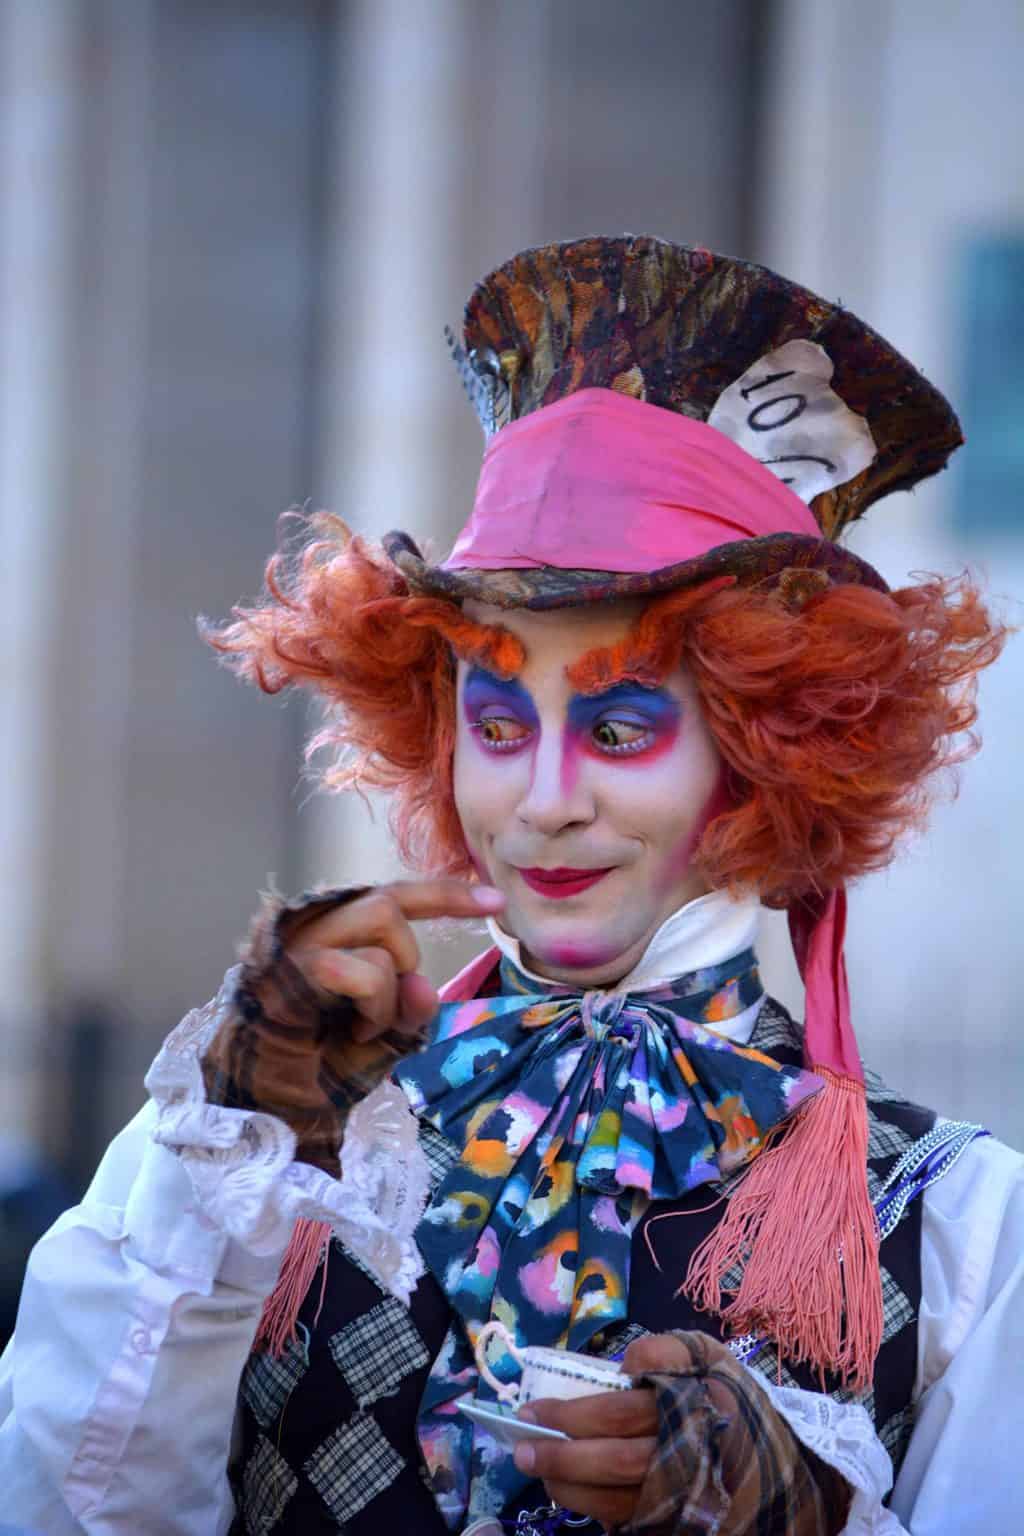 Man colorfully costumed as a clown